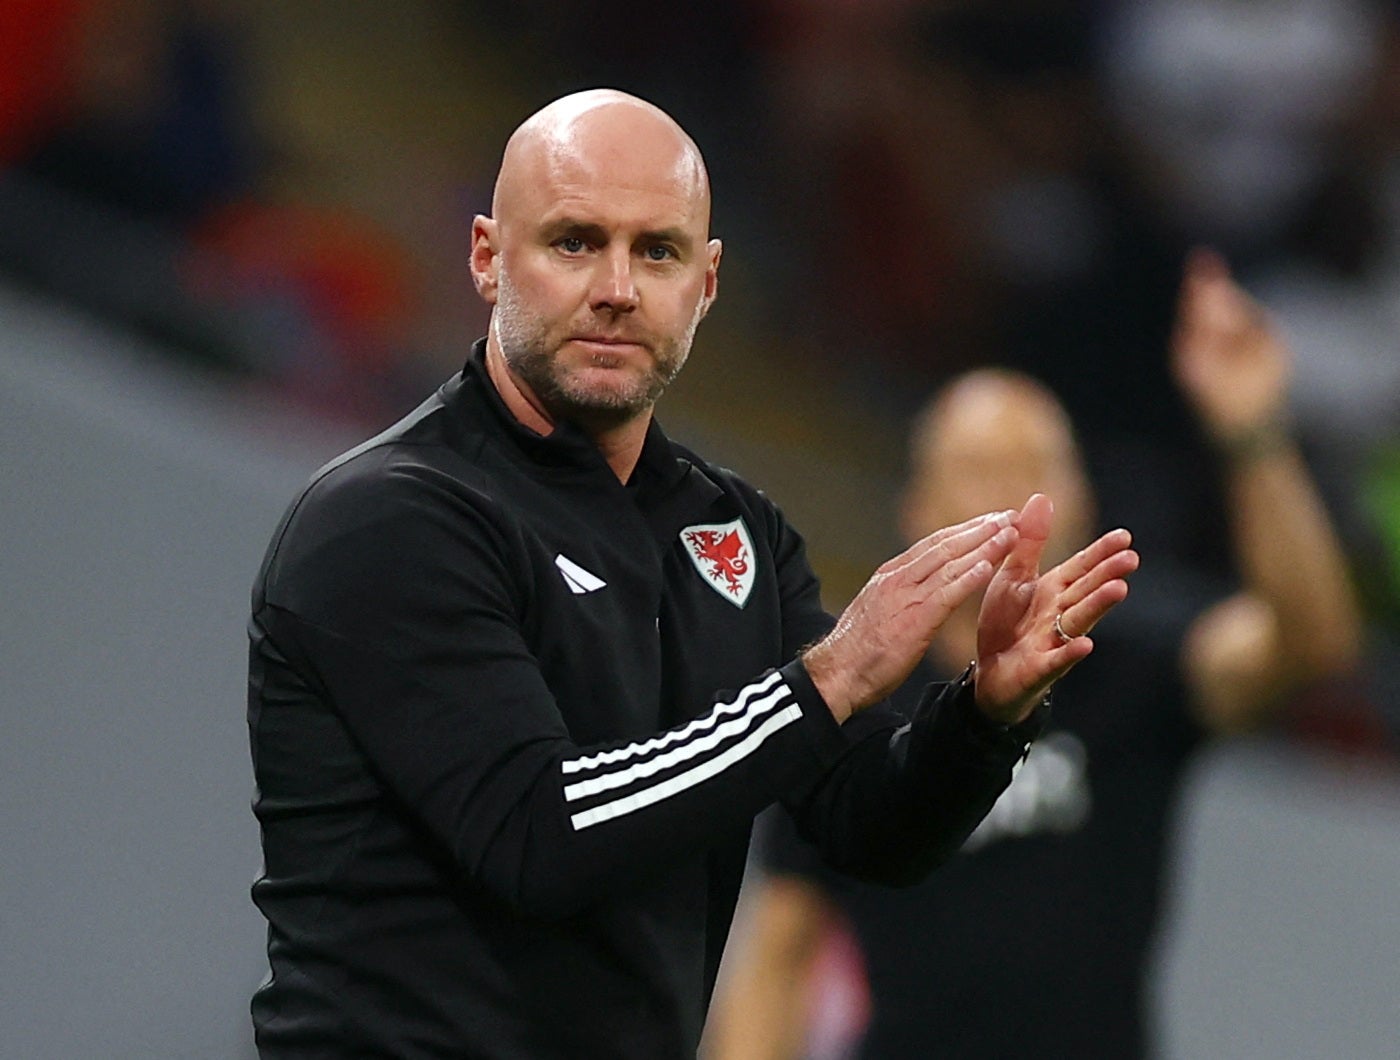 Wales coach Rob Page reacts during his side’s draw with USA at the World Cup